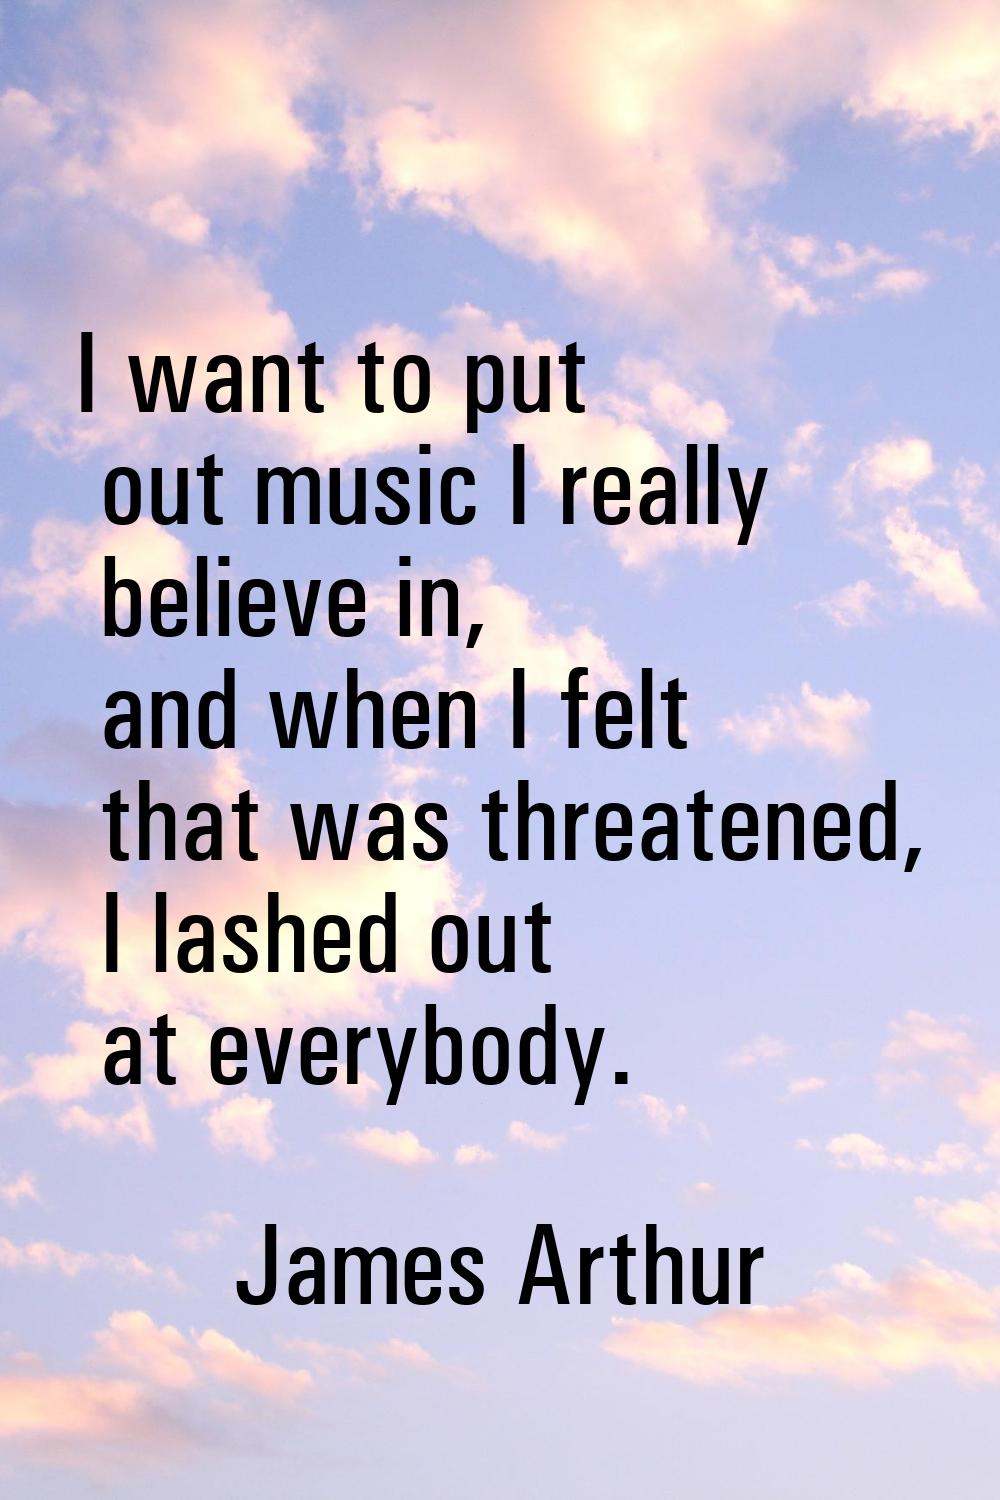 I want to put out music I really believe in, and when I felt that was threatened, I lashed out at e